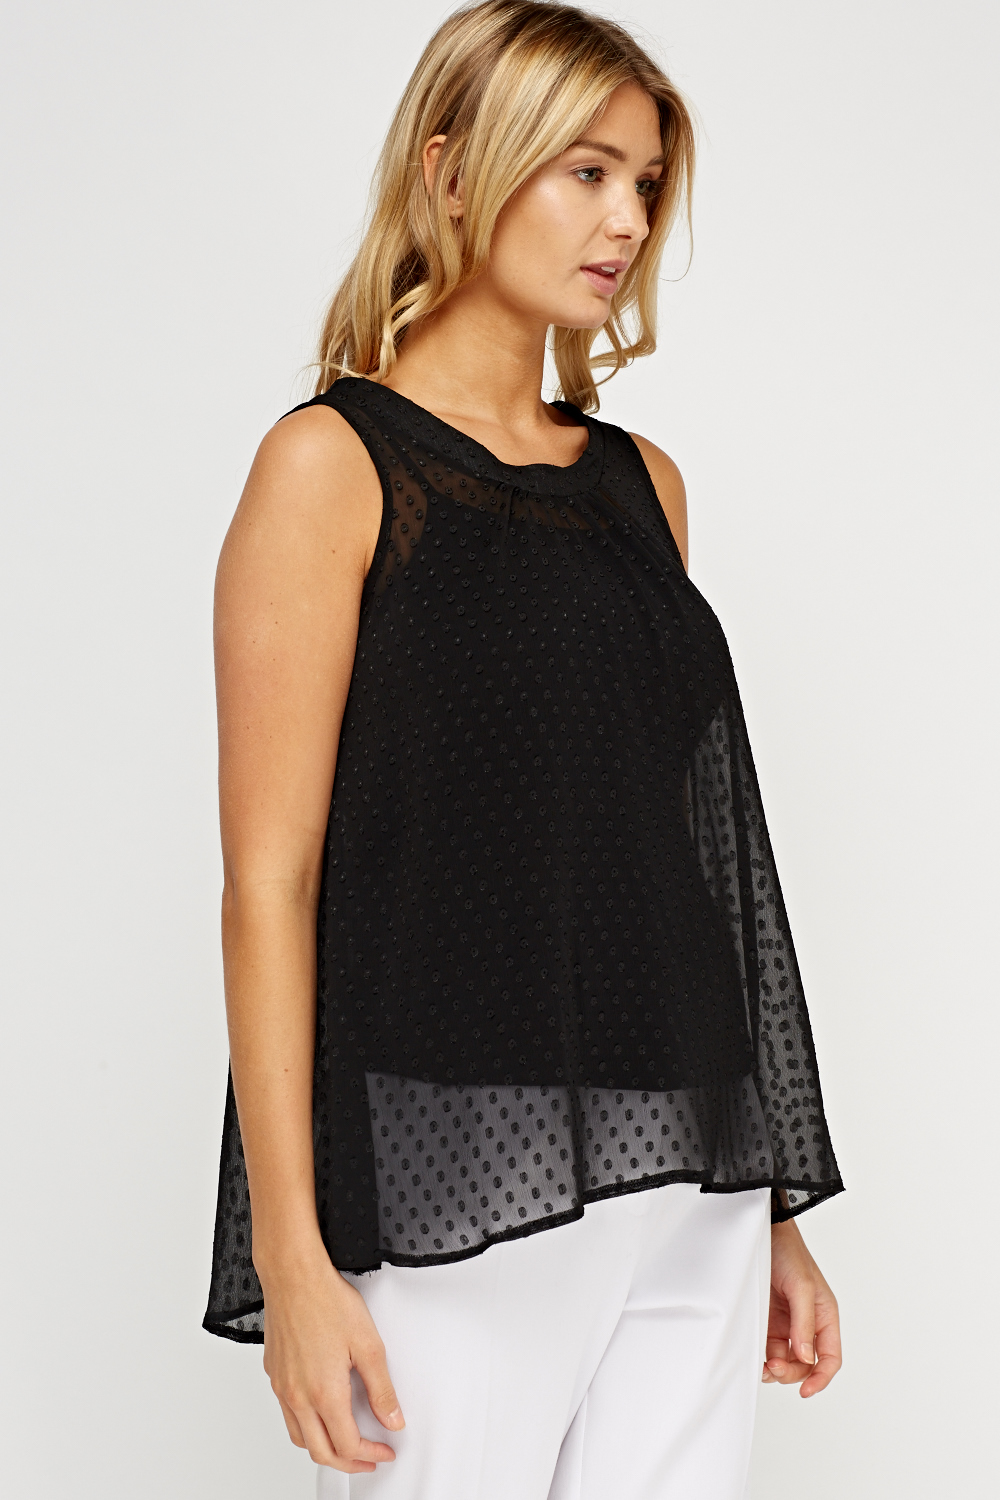 Mesh Dotted Sleeveless Top - Just $7